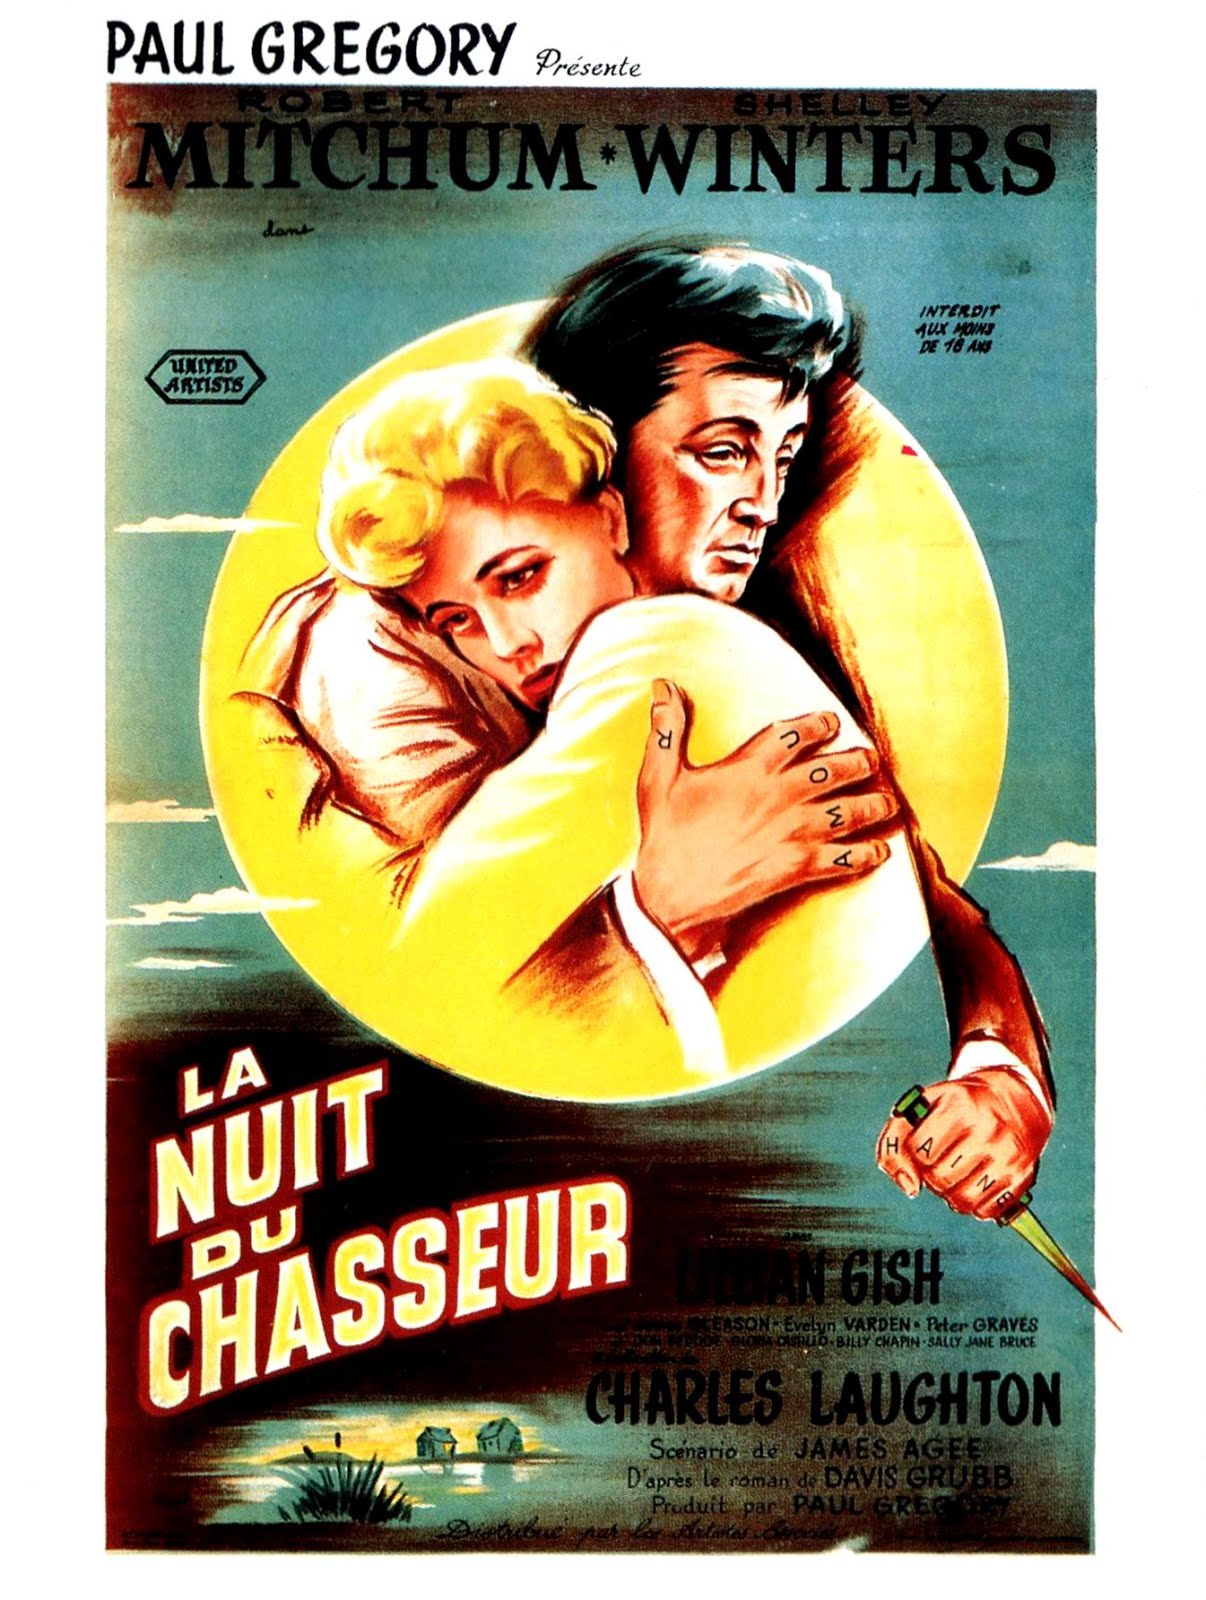 La nuit du chasseur (1954) Charles Laughton - The night of the hunter (15.08.1954 / 07.10.1954)